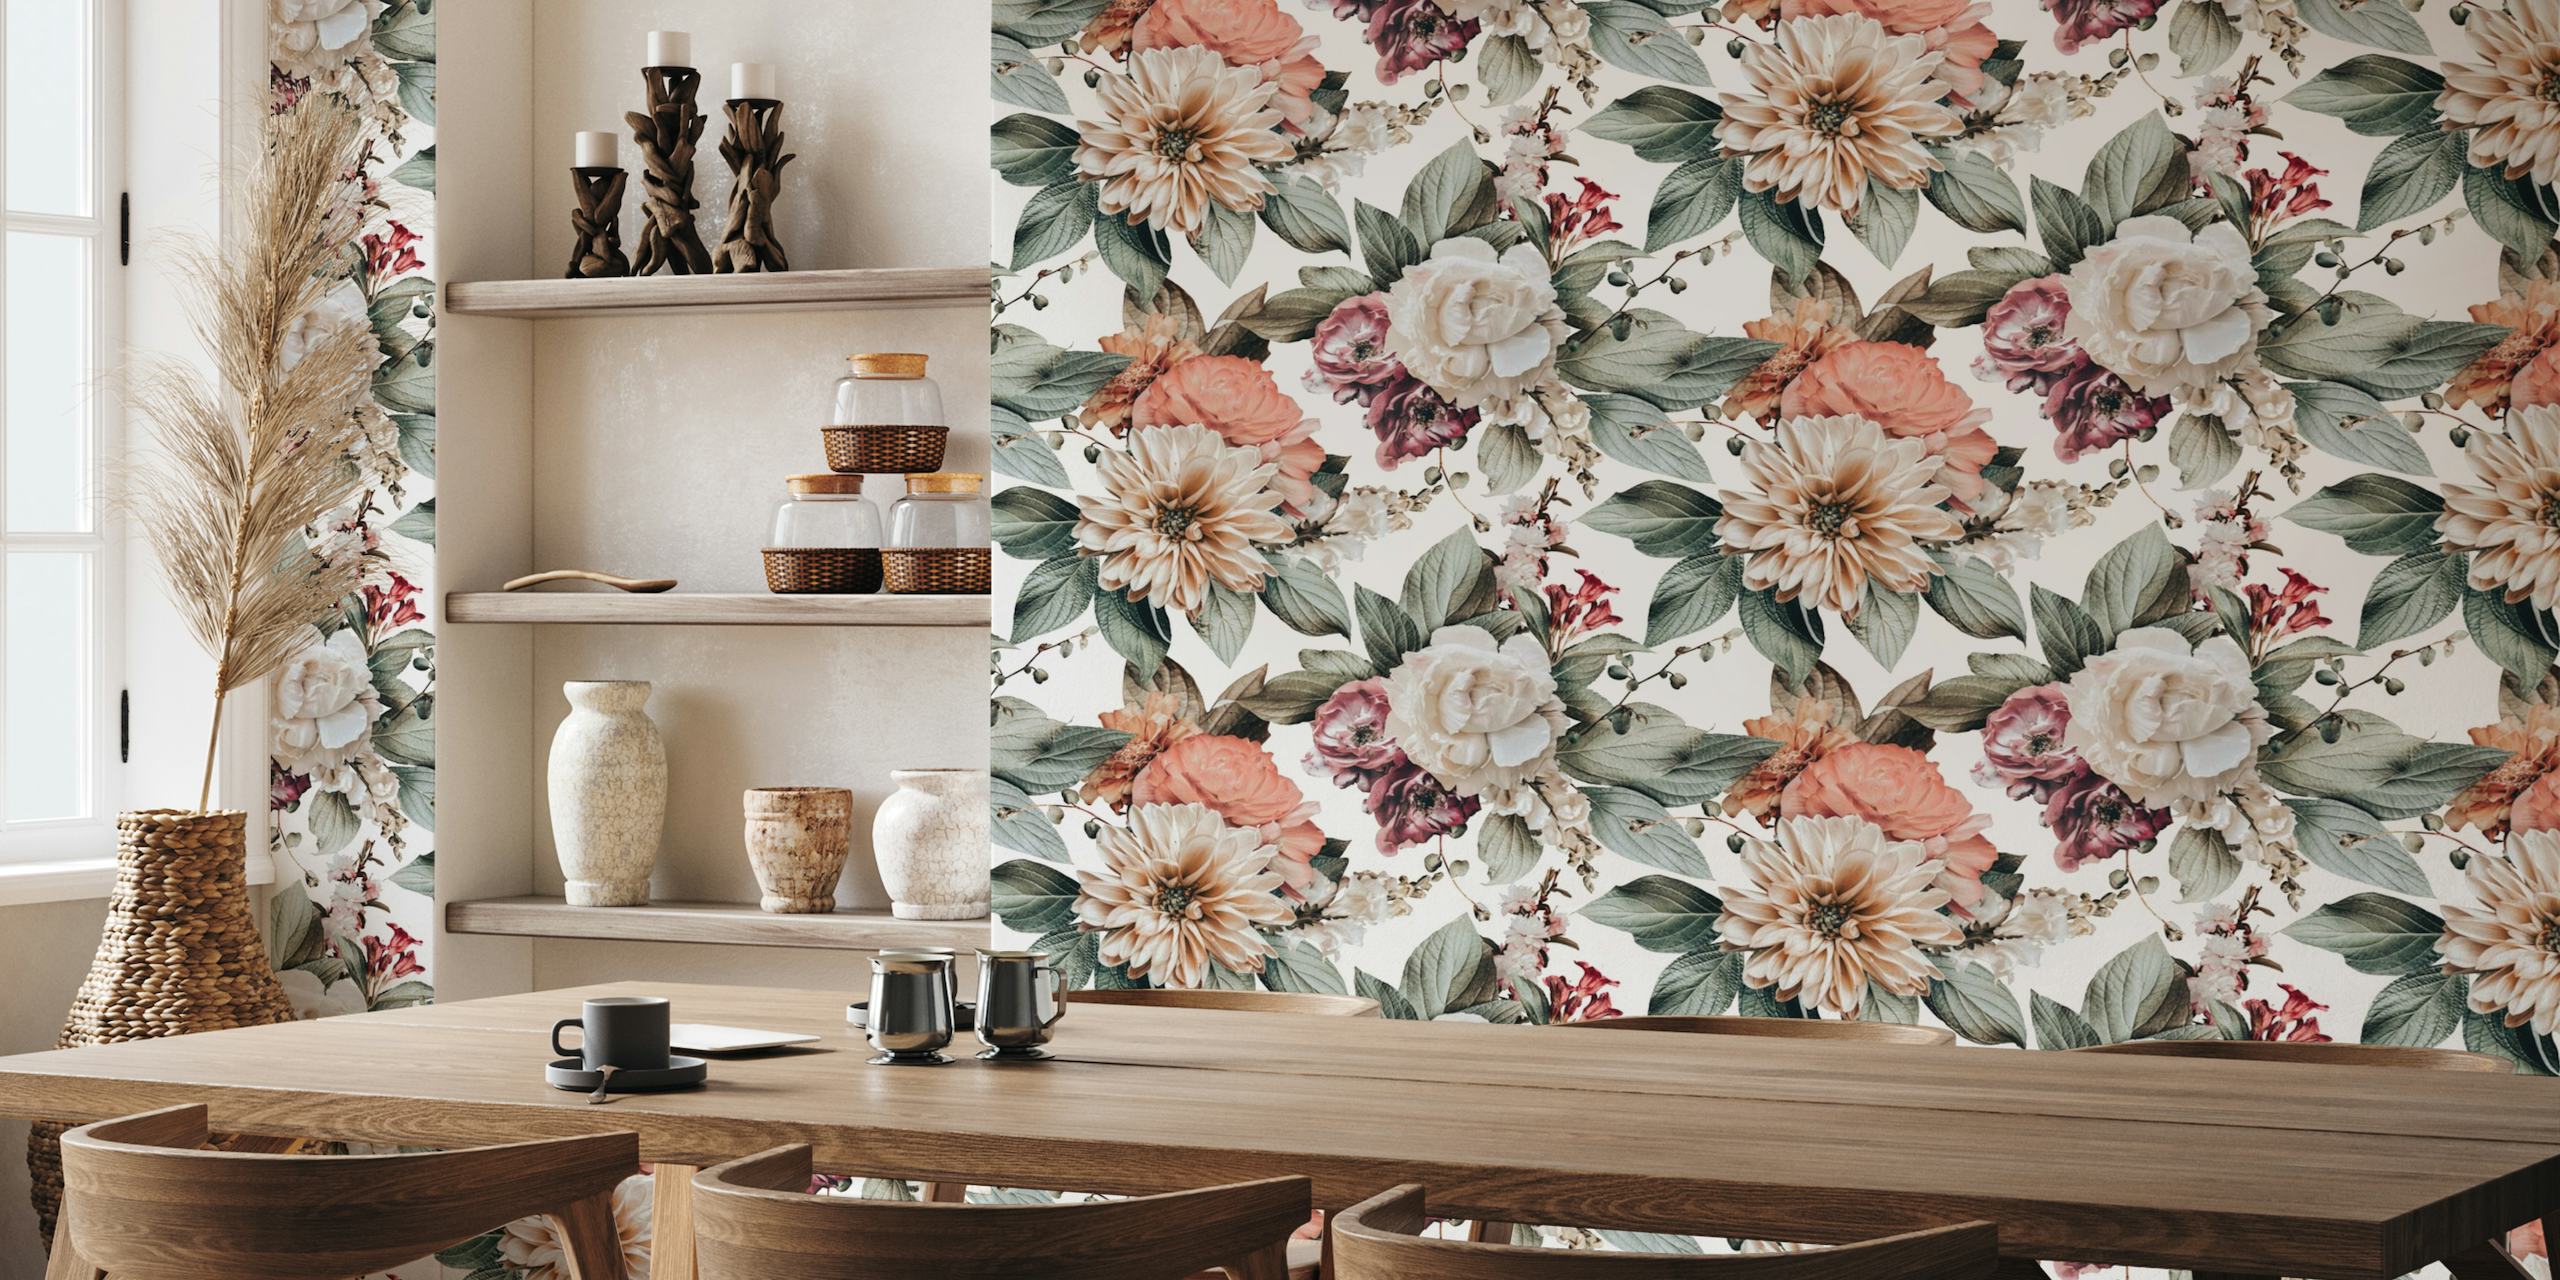 Cloves Lane floral wall mural with blush pink and white blooms and green foliage